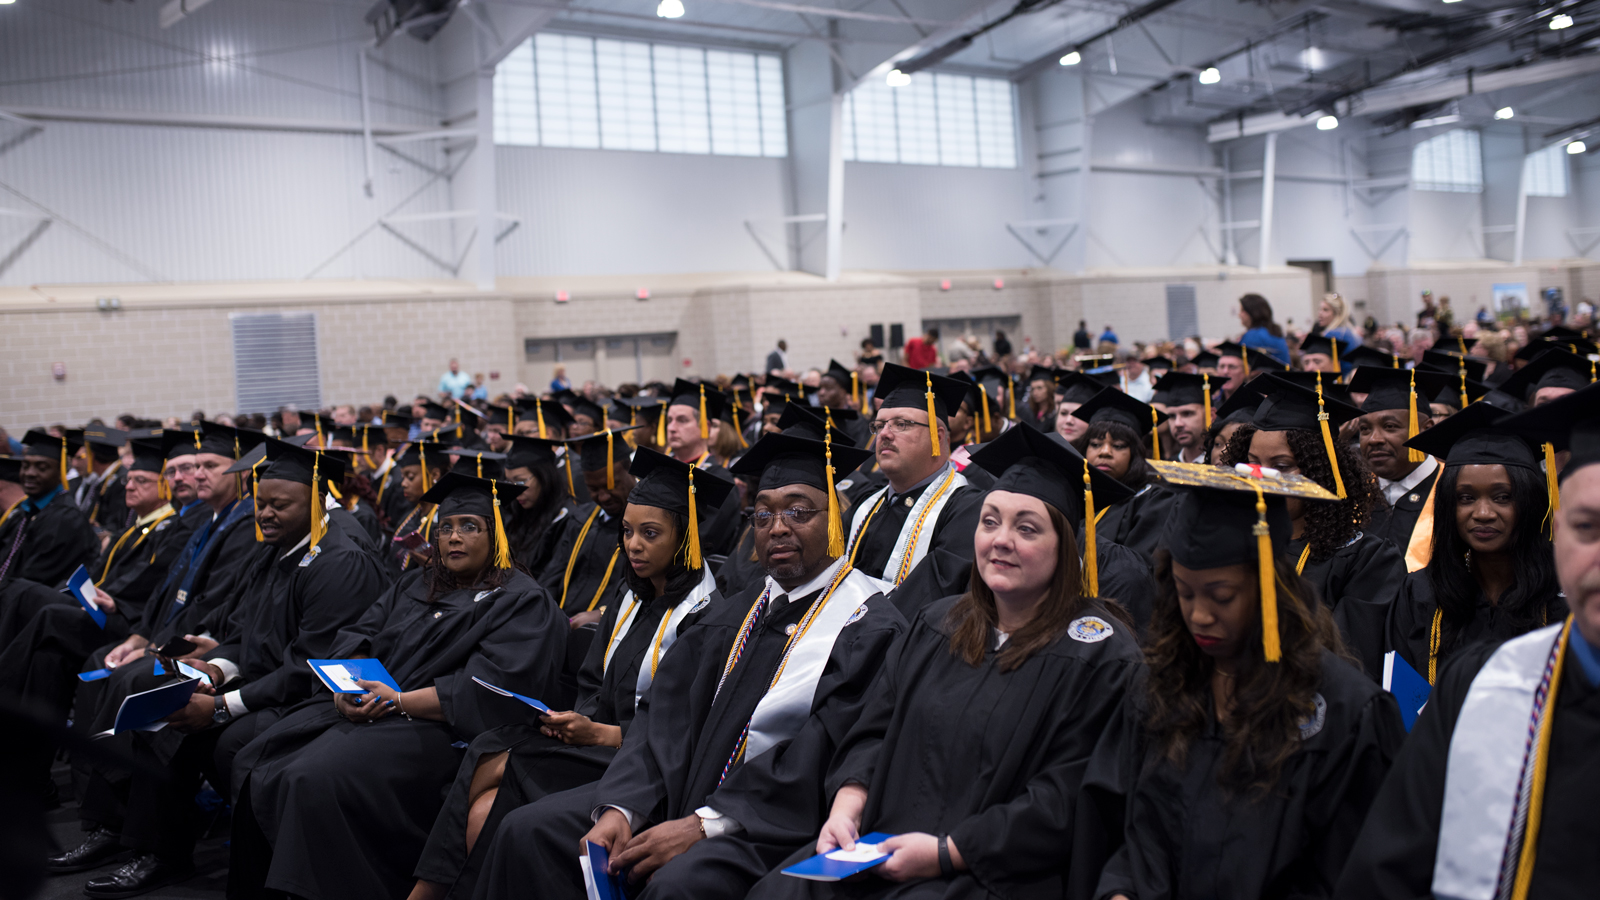 Columbia Southern University conducts its 2017 Commencement at the Foley Event Center at OWA on Oct. 27, 2017.